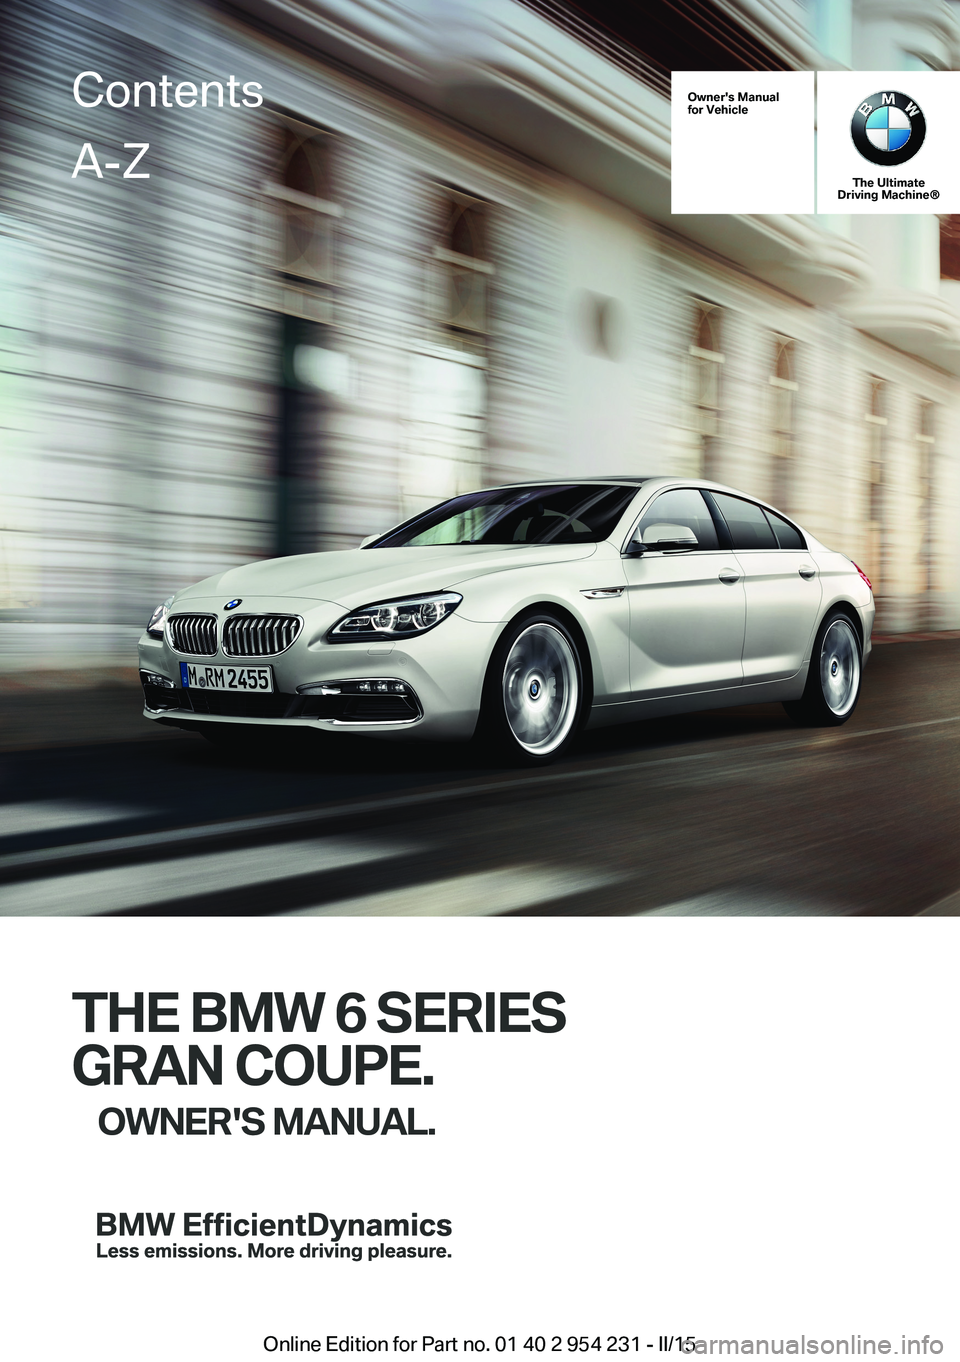 BMW 650I GRAN COUPE 2015  Owners Manual Owner's Manualfor Vehicle
The UltimateDriving Machine®
THE BMW 6 SERIES
GRAN COUPE.
OWNER'S MANUAL.
ContentsA-Z
Online Edition for Part no. 01 40 2 954 231 - II/15   